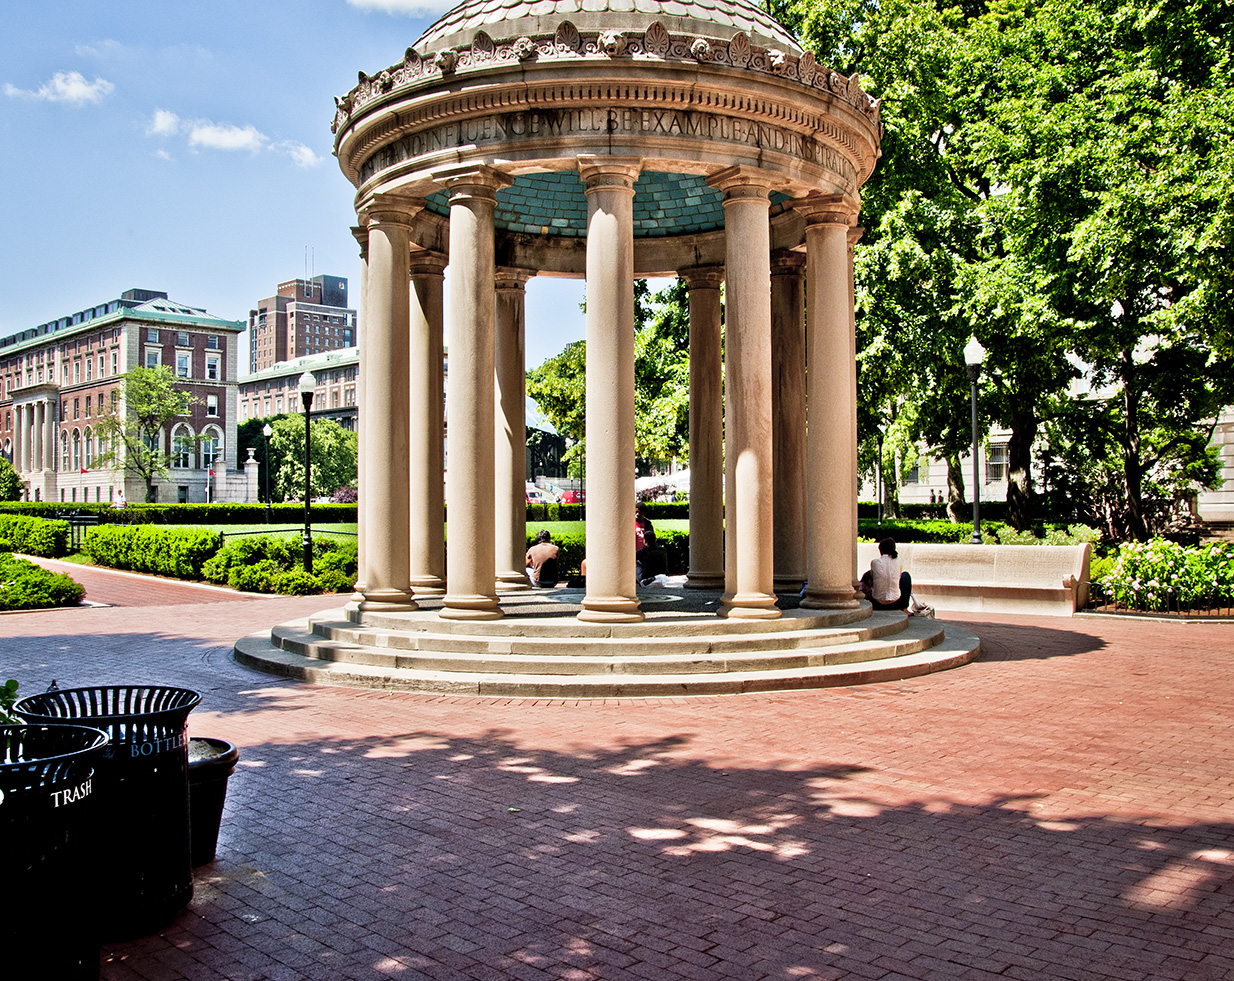 A stone gazebo is at the center of  brick plaza